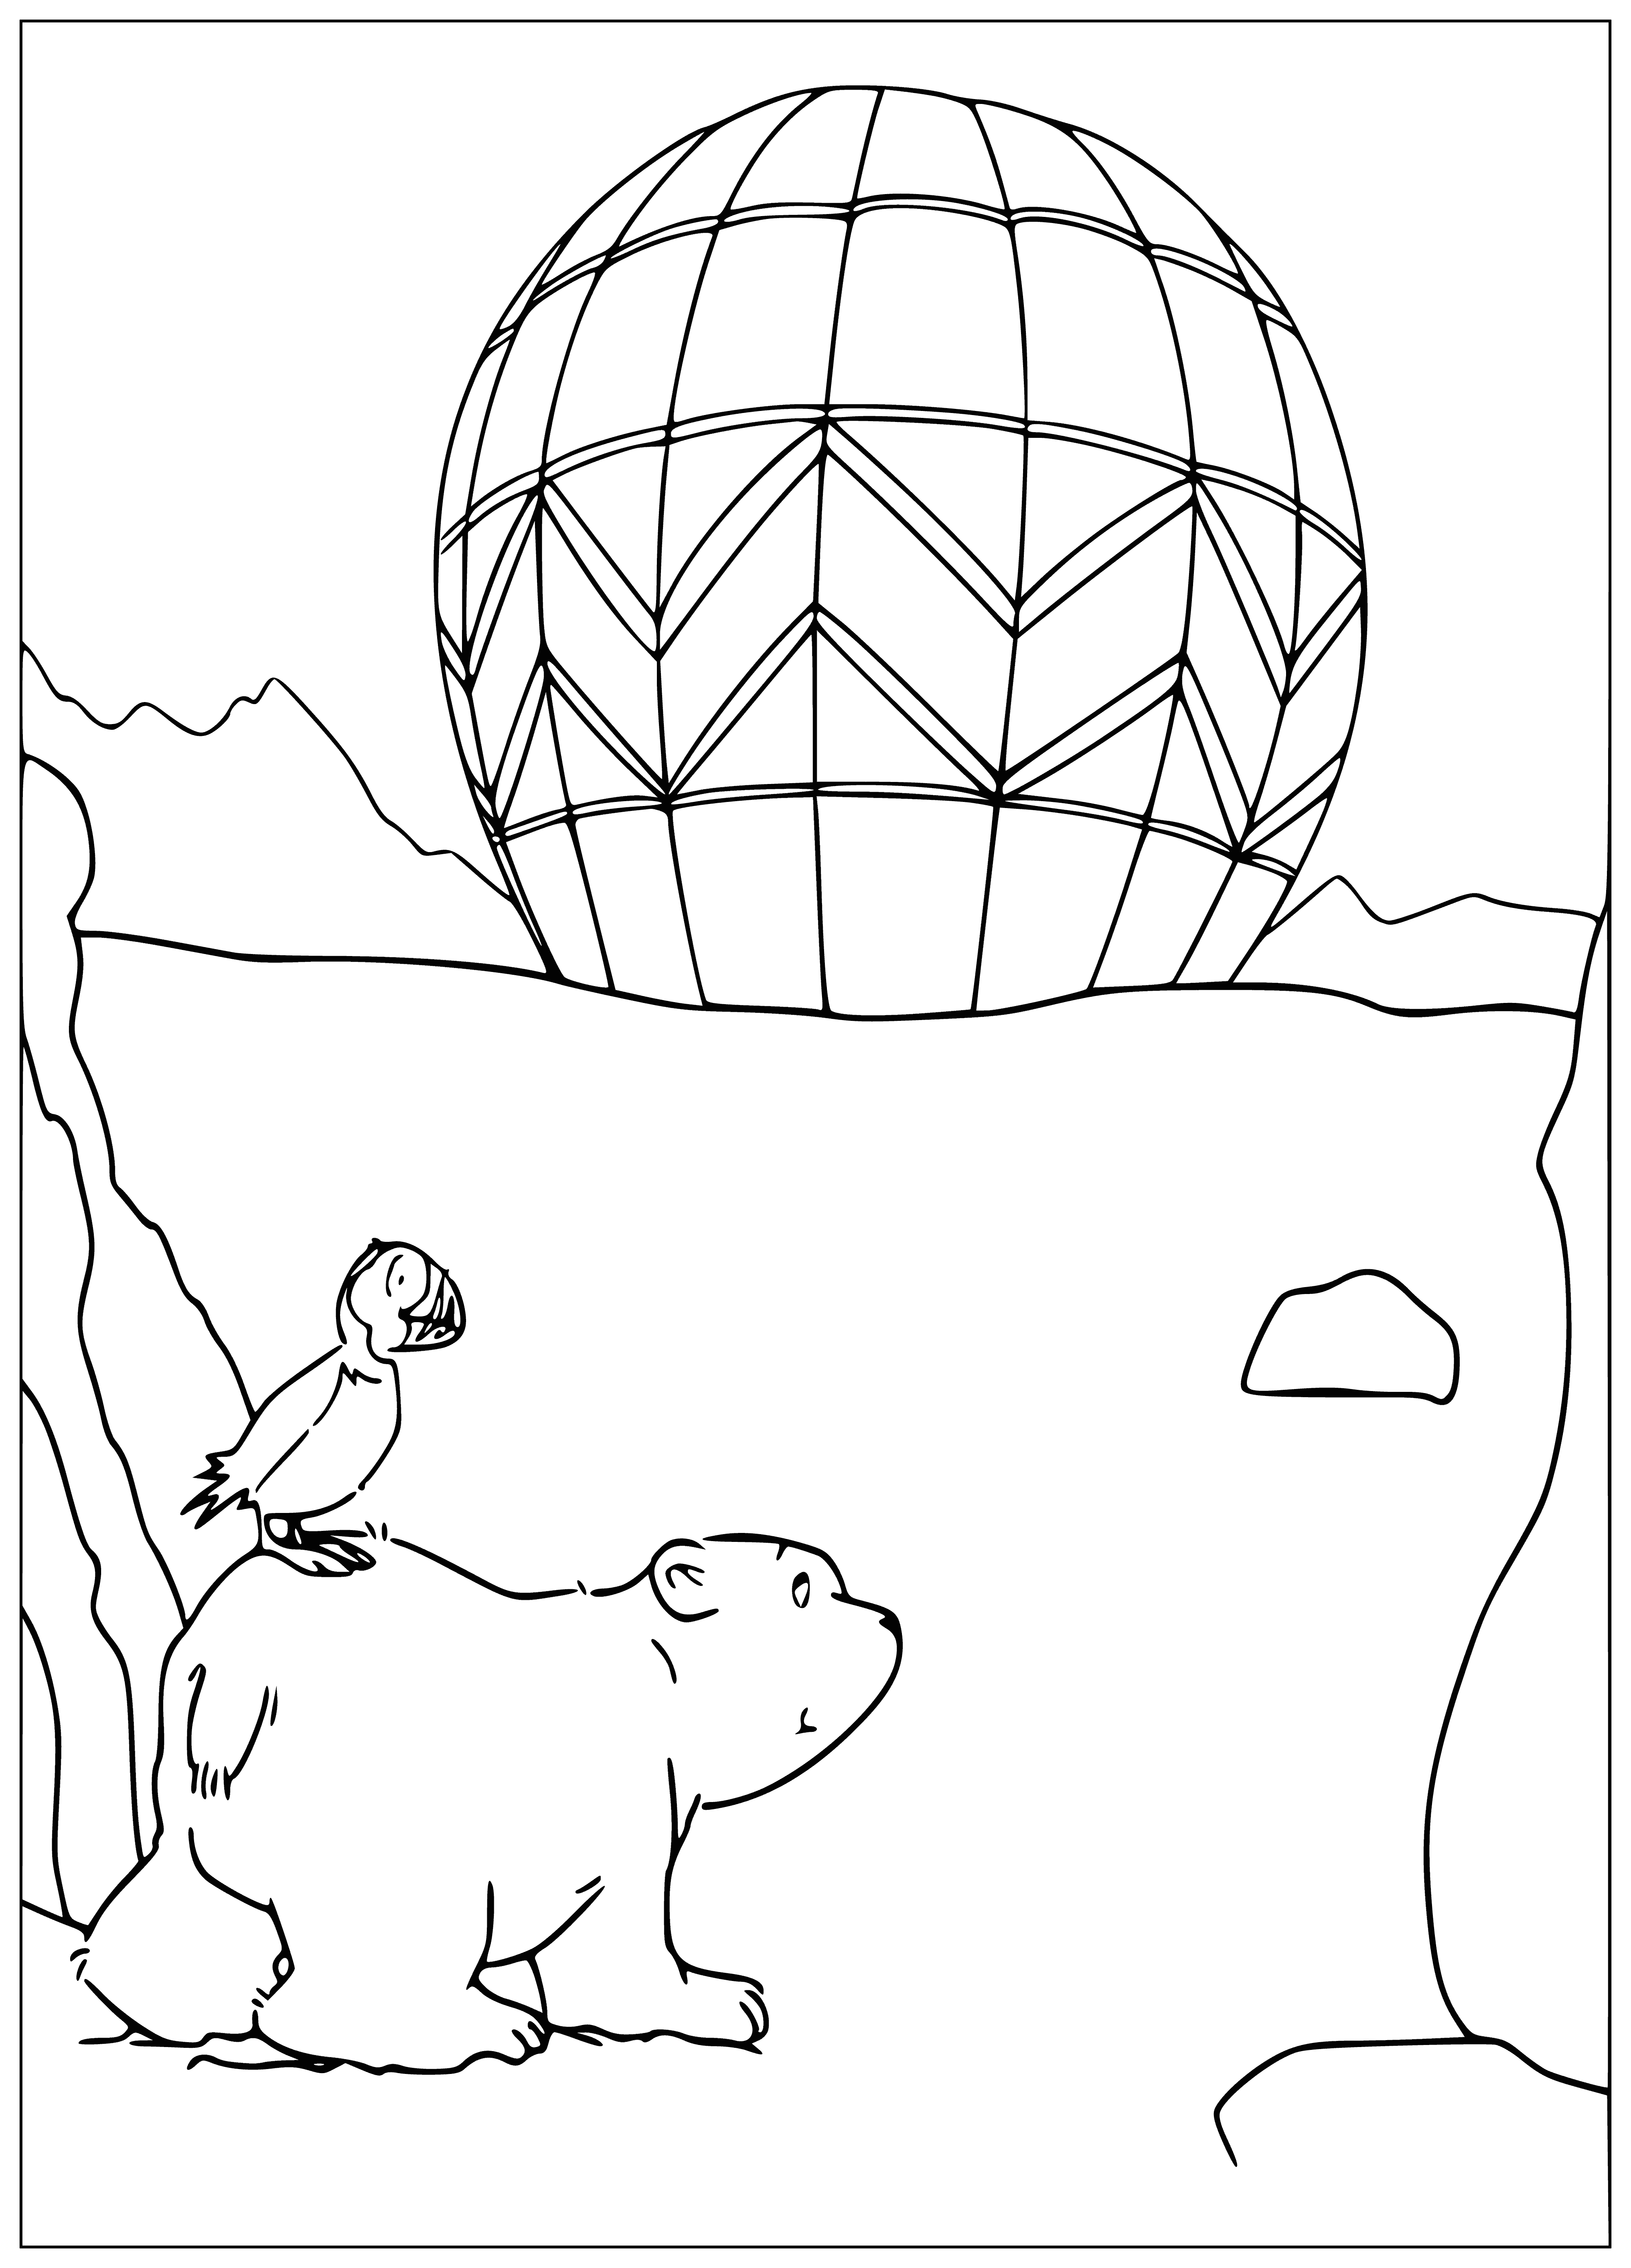 coloring page: Little polar bear holds a green teddy with white stomach & red ribbon; looks up at something off-screen.